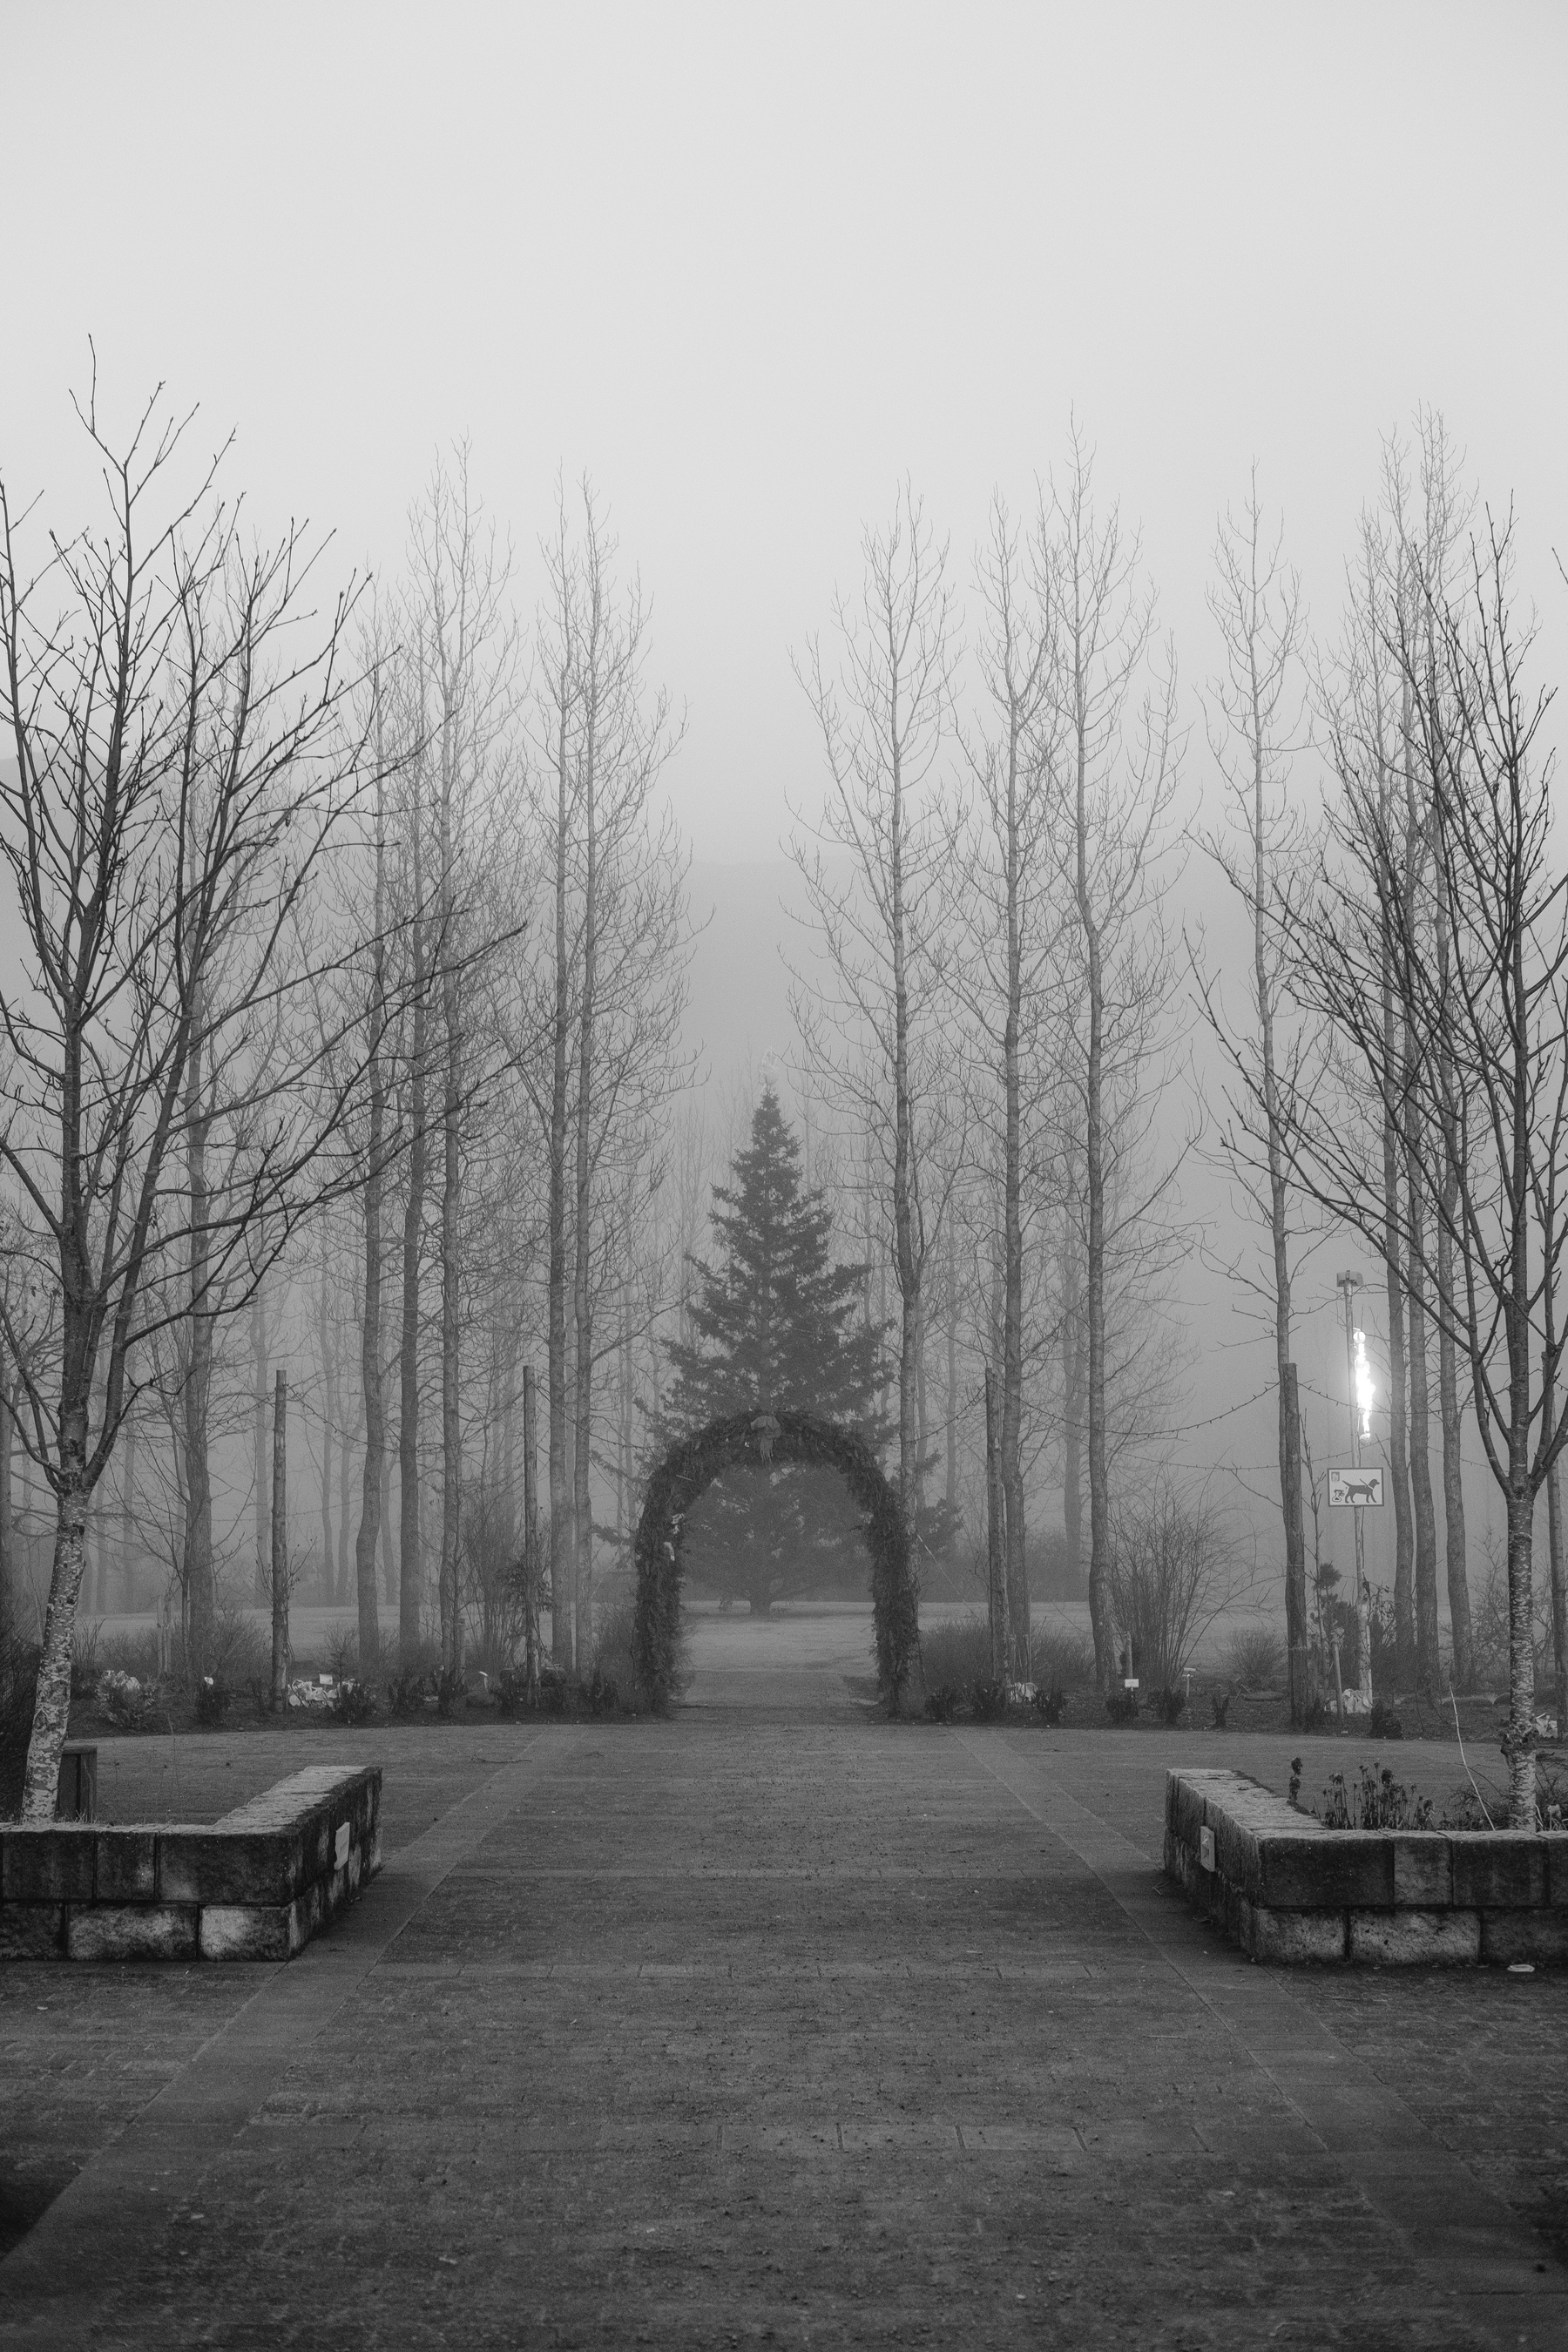 The entrance to the small park in Hveragerði, covered in fog.